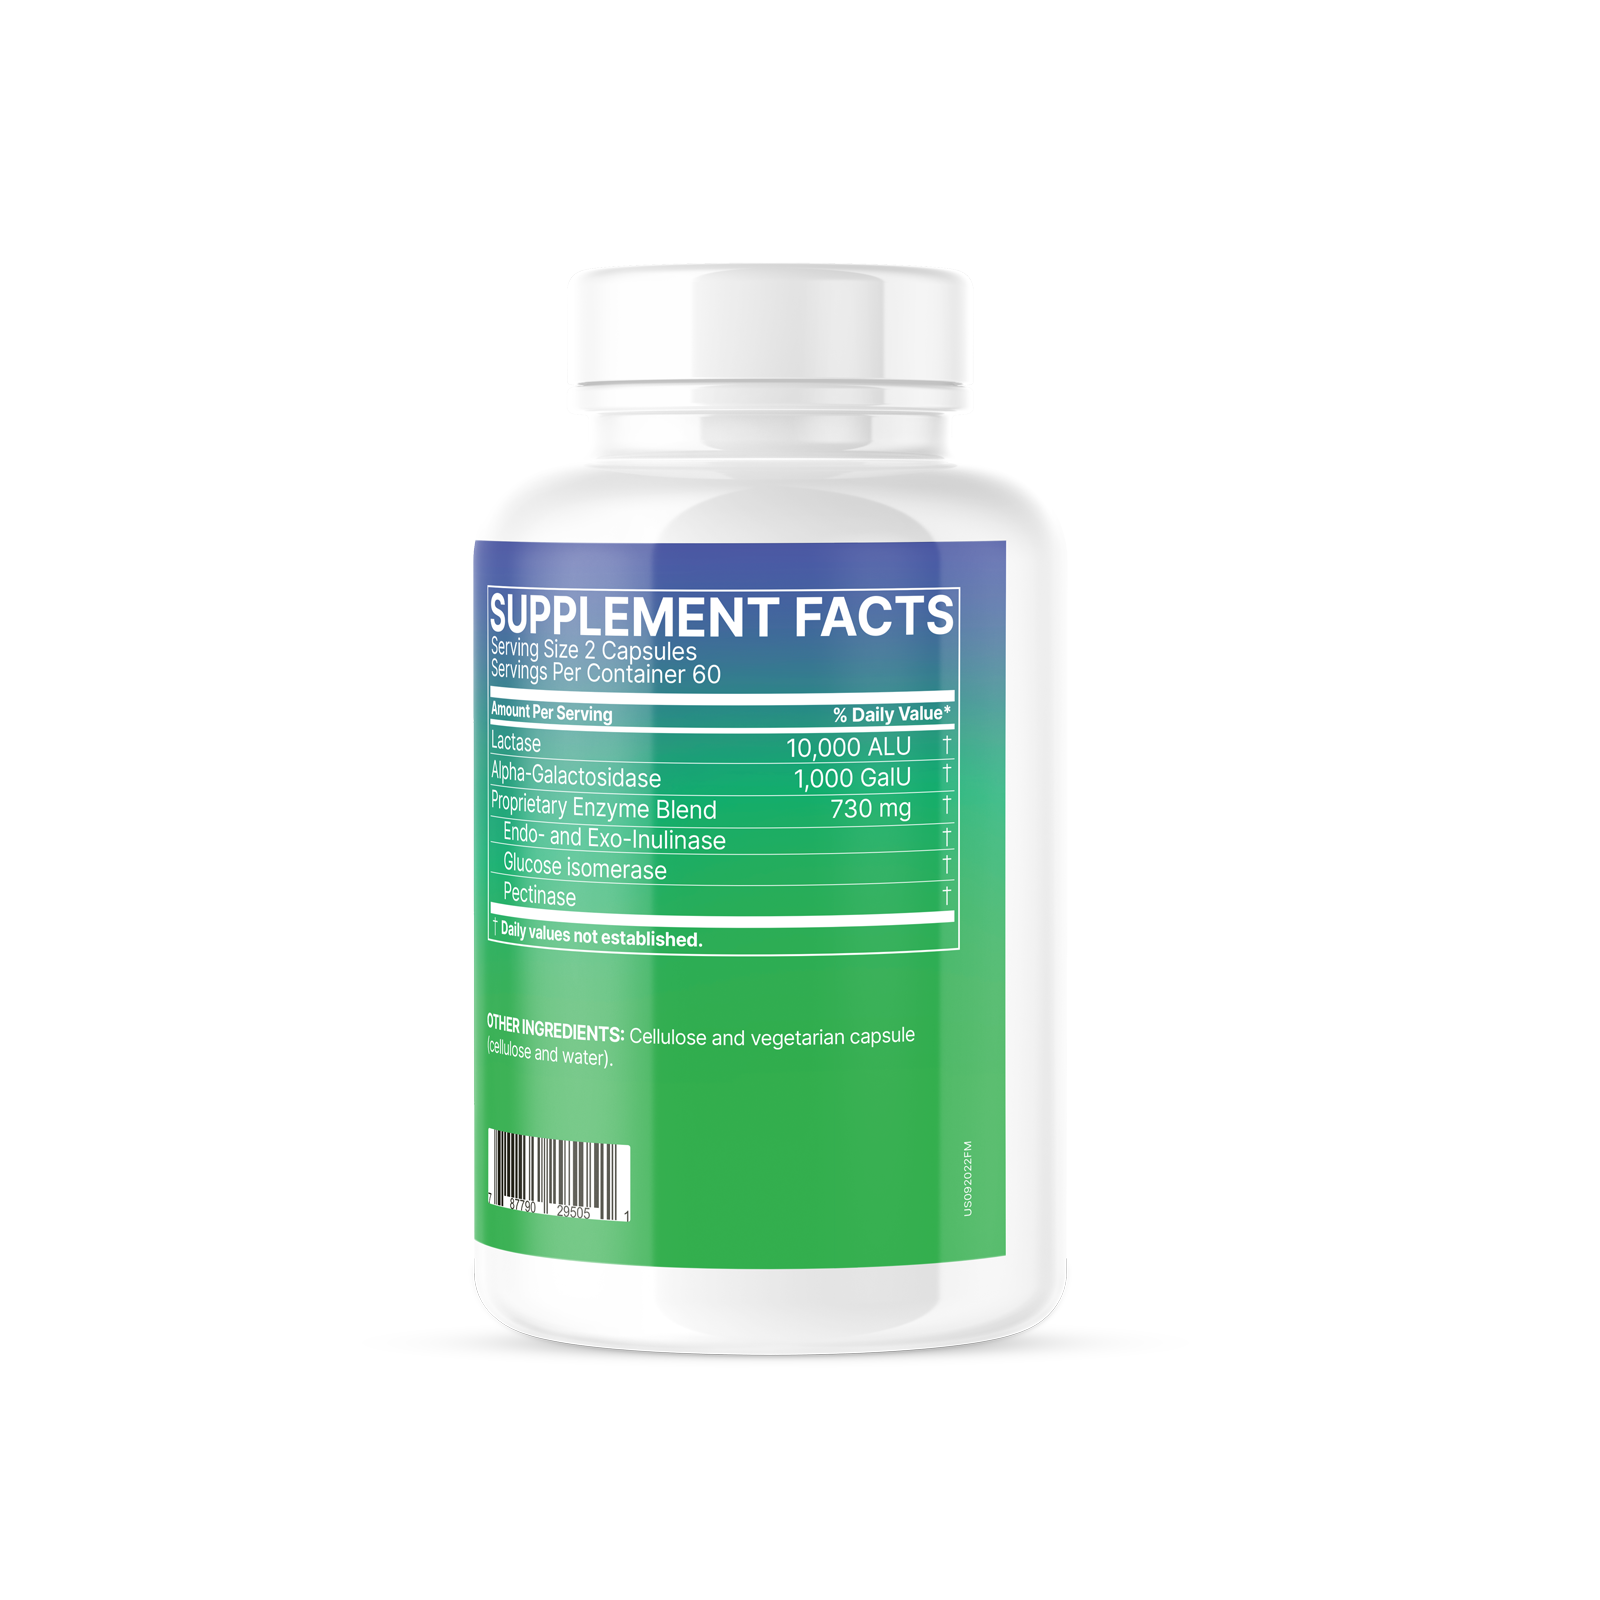 FODMATE - 120 Capsules | Microbiome Labs